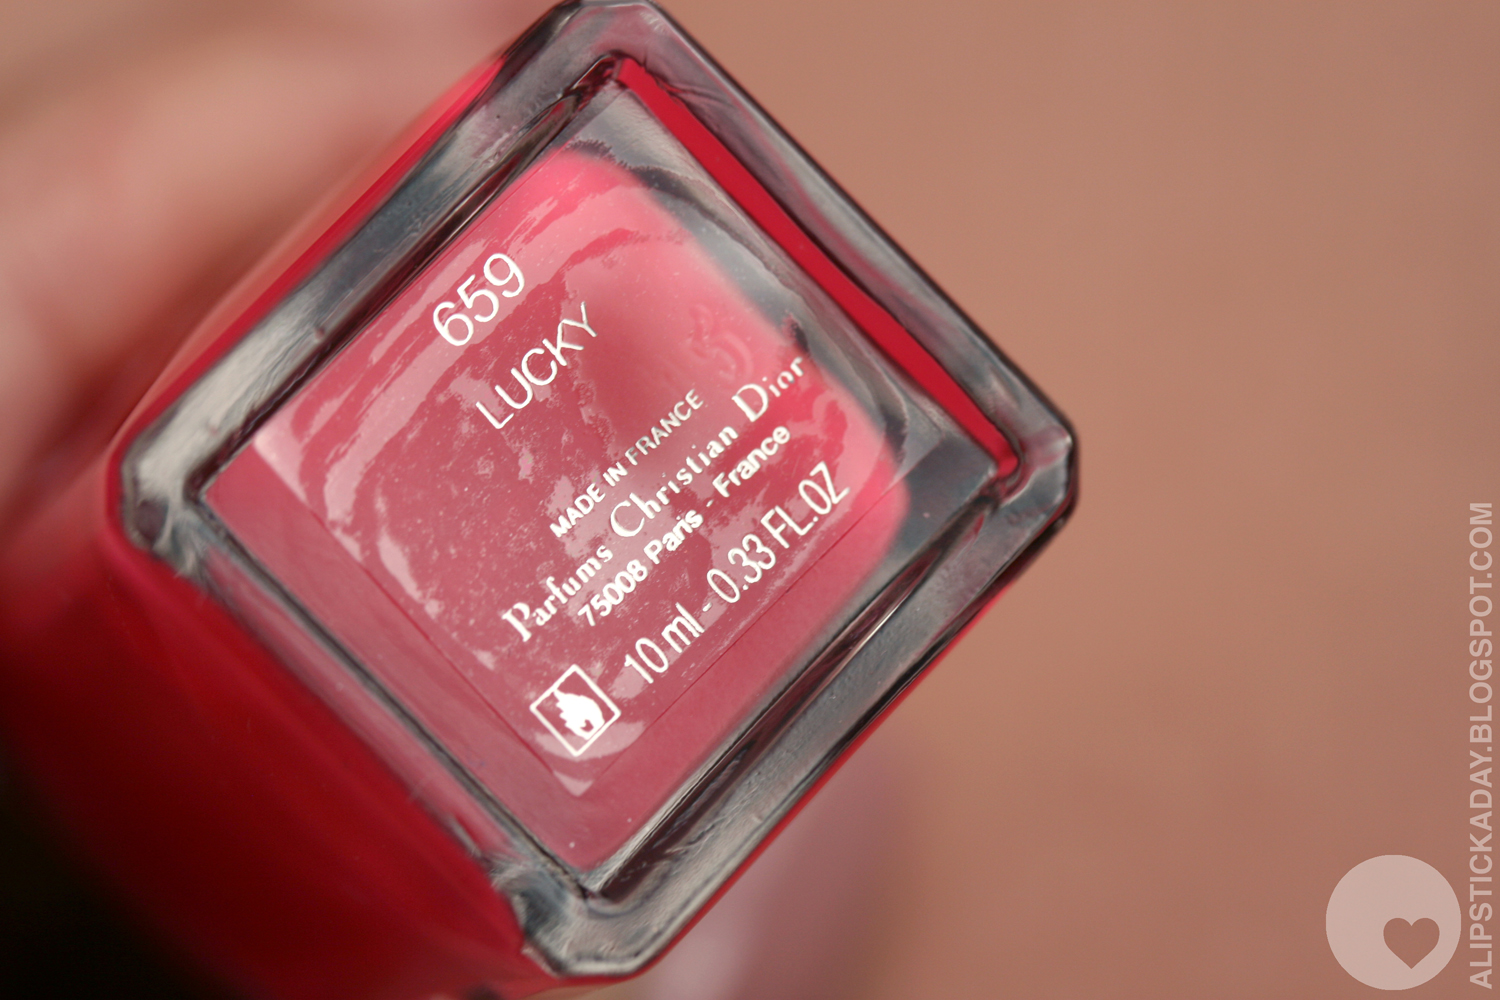 1. Dior Vernis Nail Polish in "Lucky" - wide 11